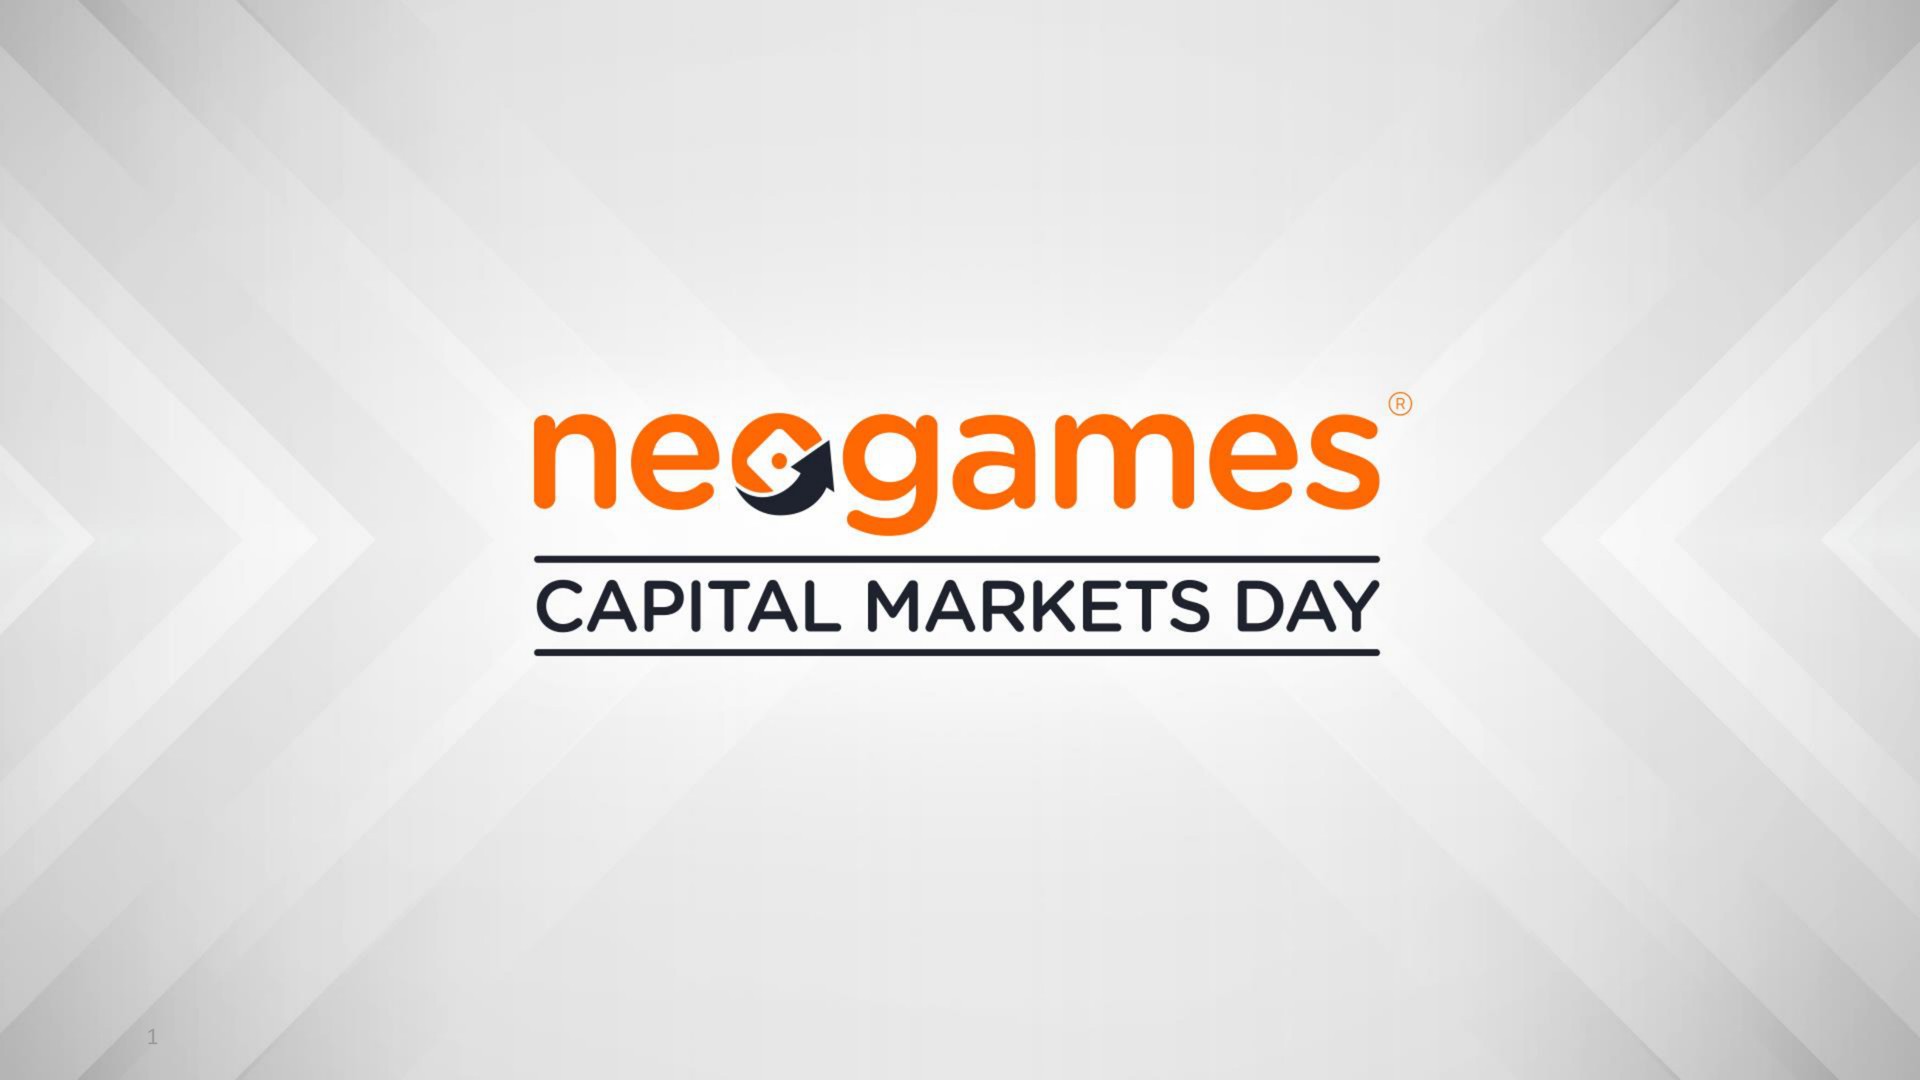 a capital markets day | Neogames